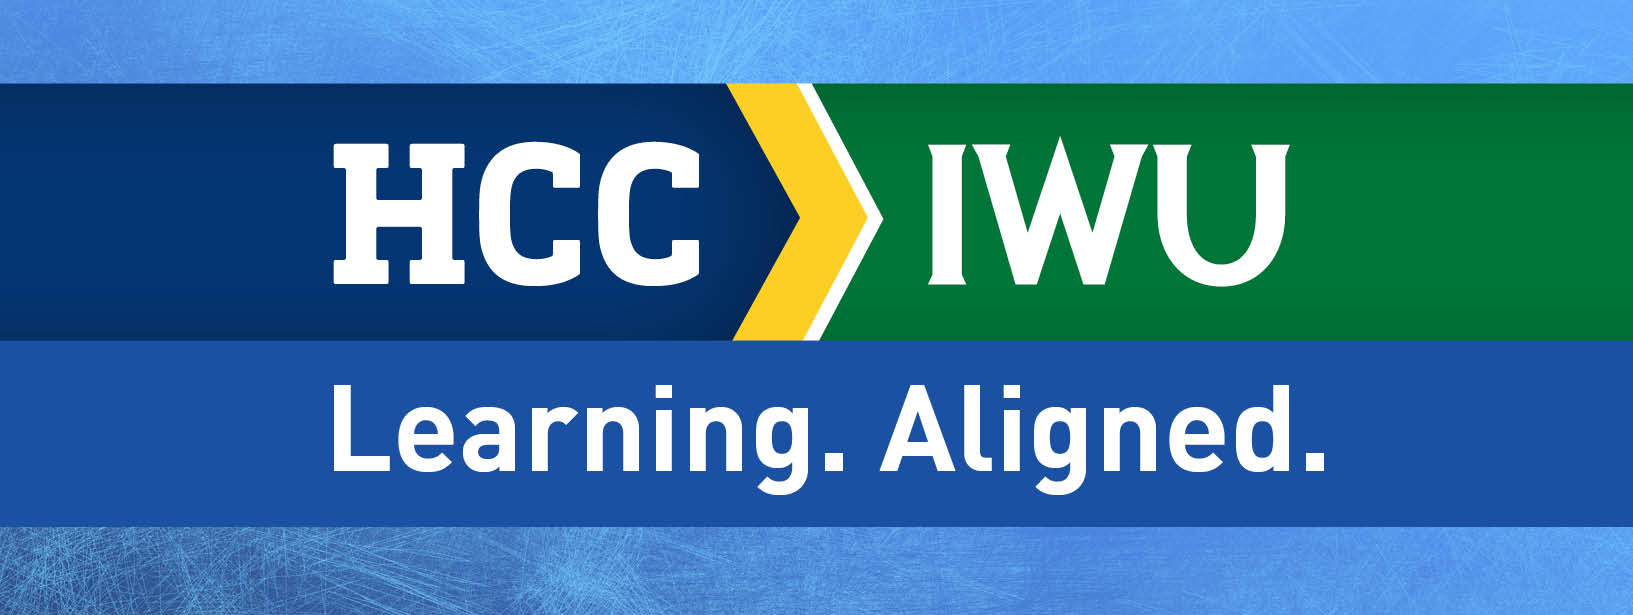 HCC to IWU: Learning. Aligned.